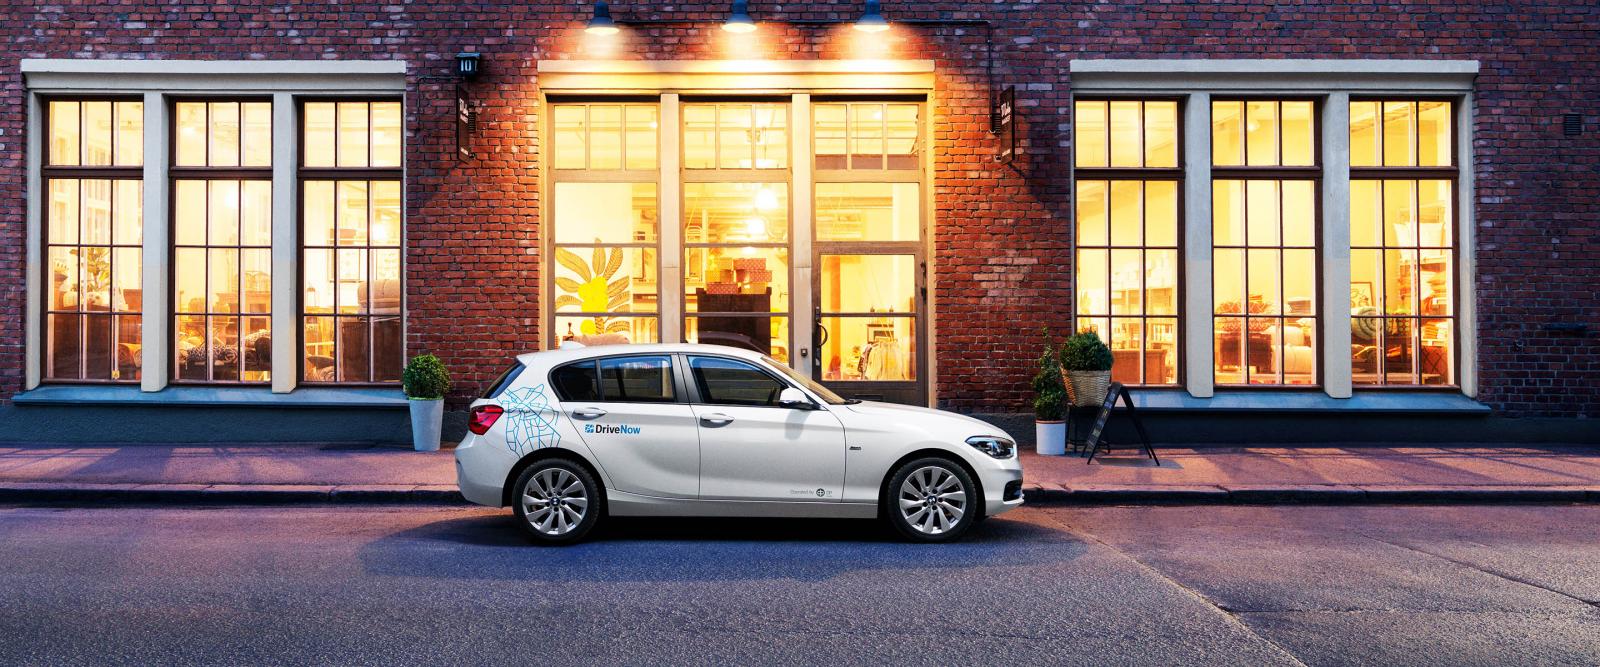 Overnight Parking Special Germany Drivenow Car Sharing